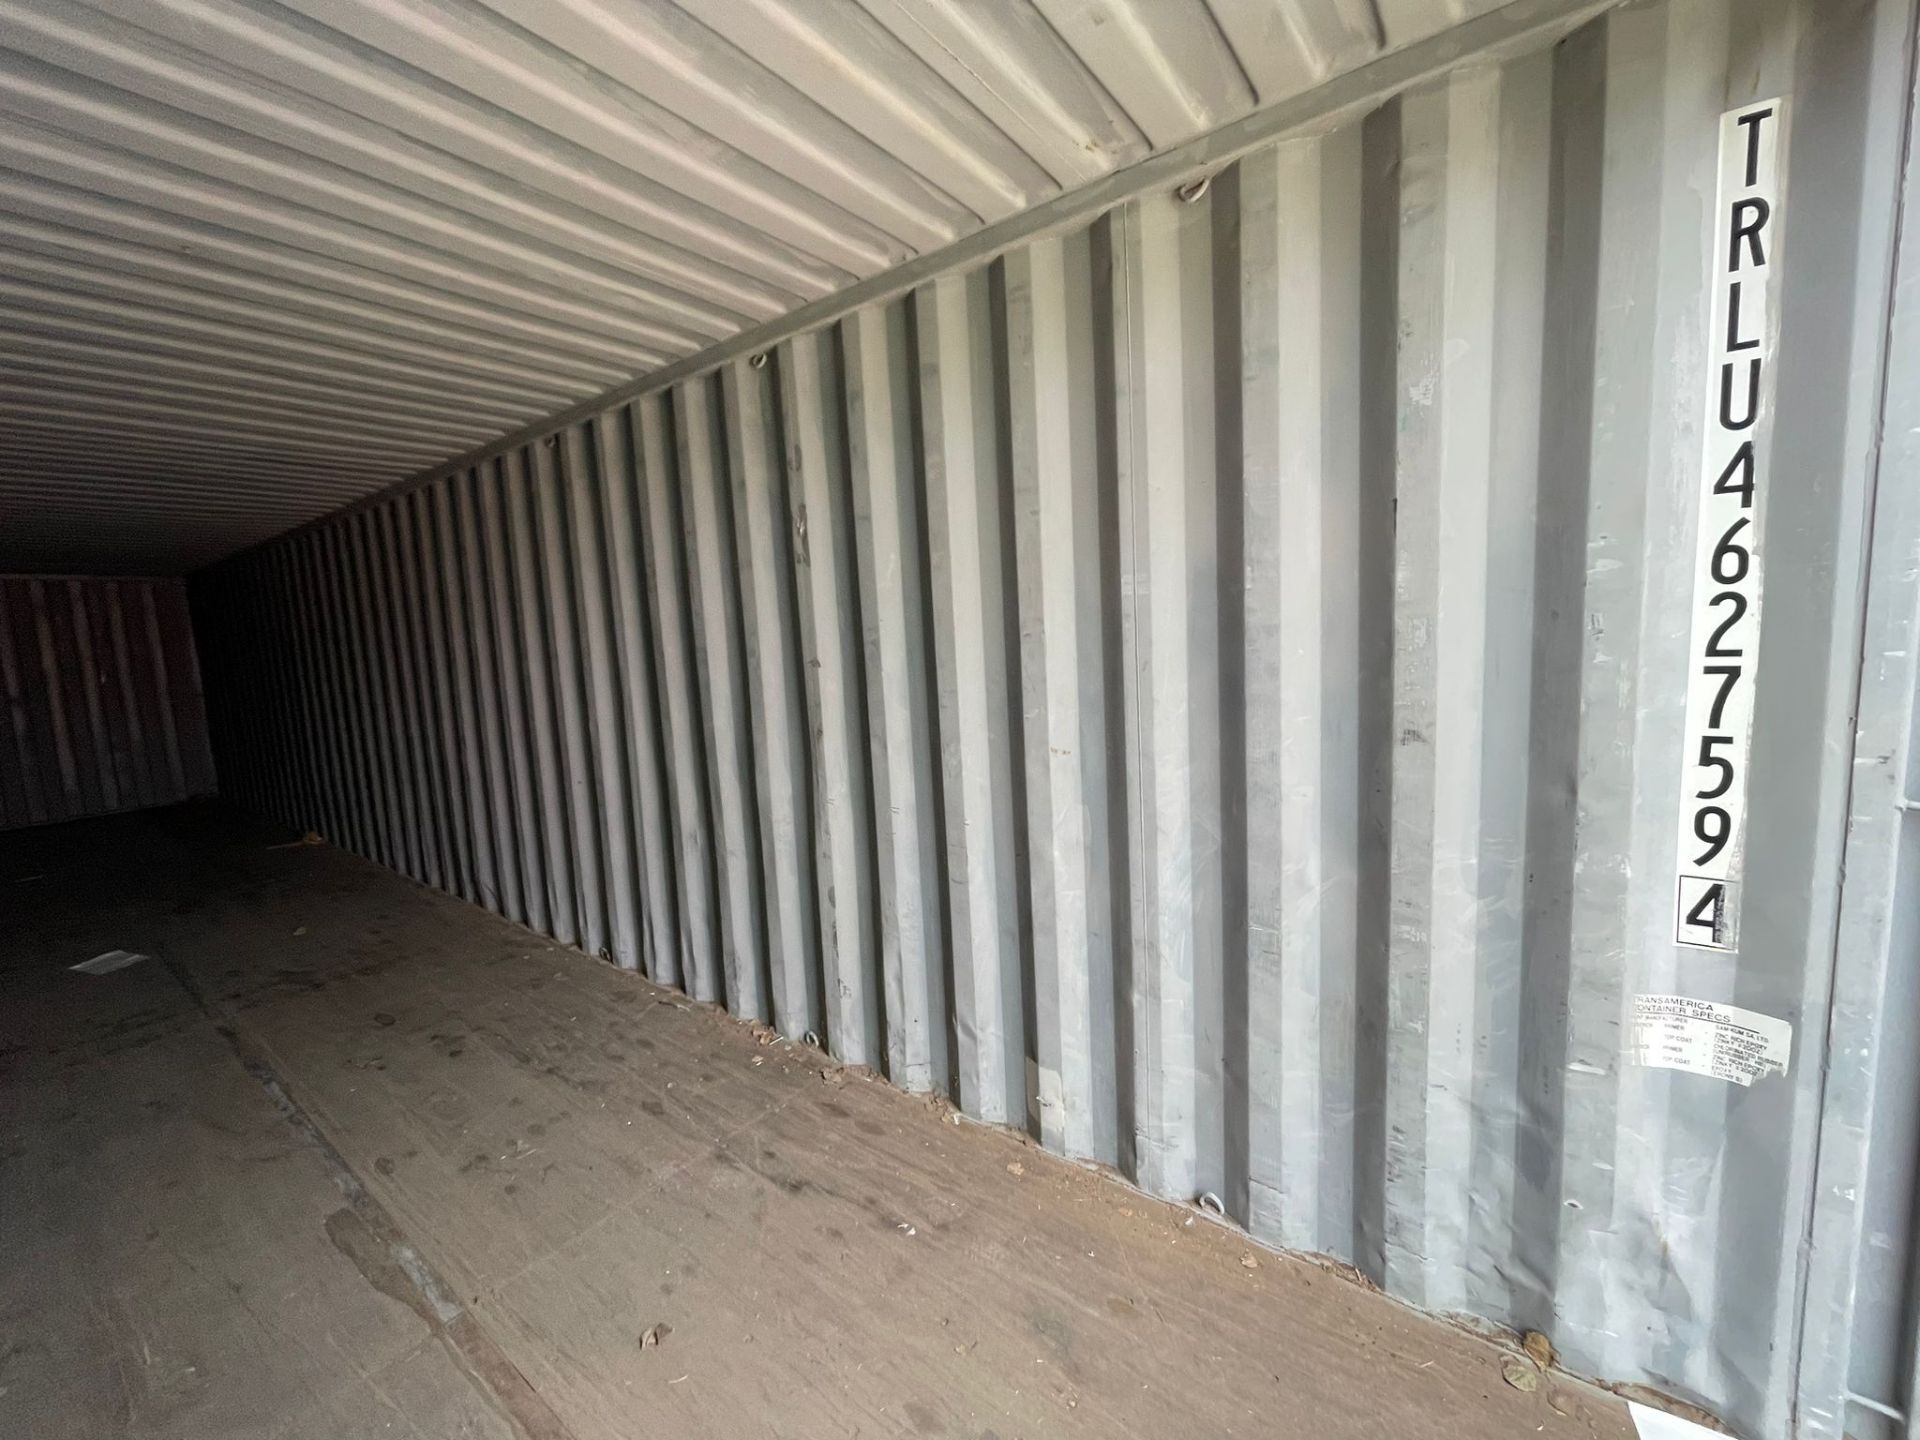 Shipping Container - ref TRLU4627594 - NO RESERVE (40’ GP - Standard) - Image 2 of 4